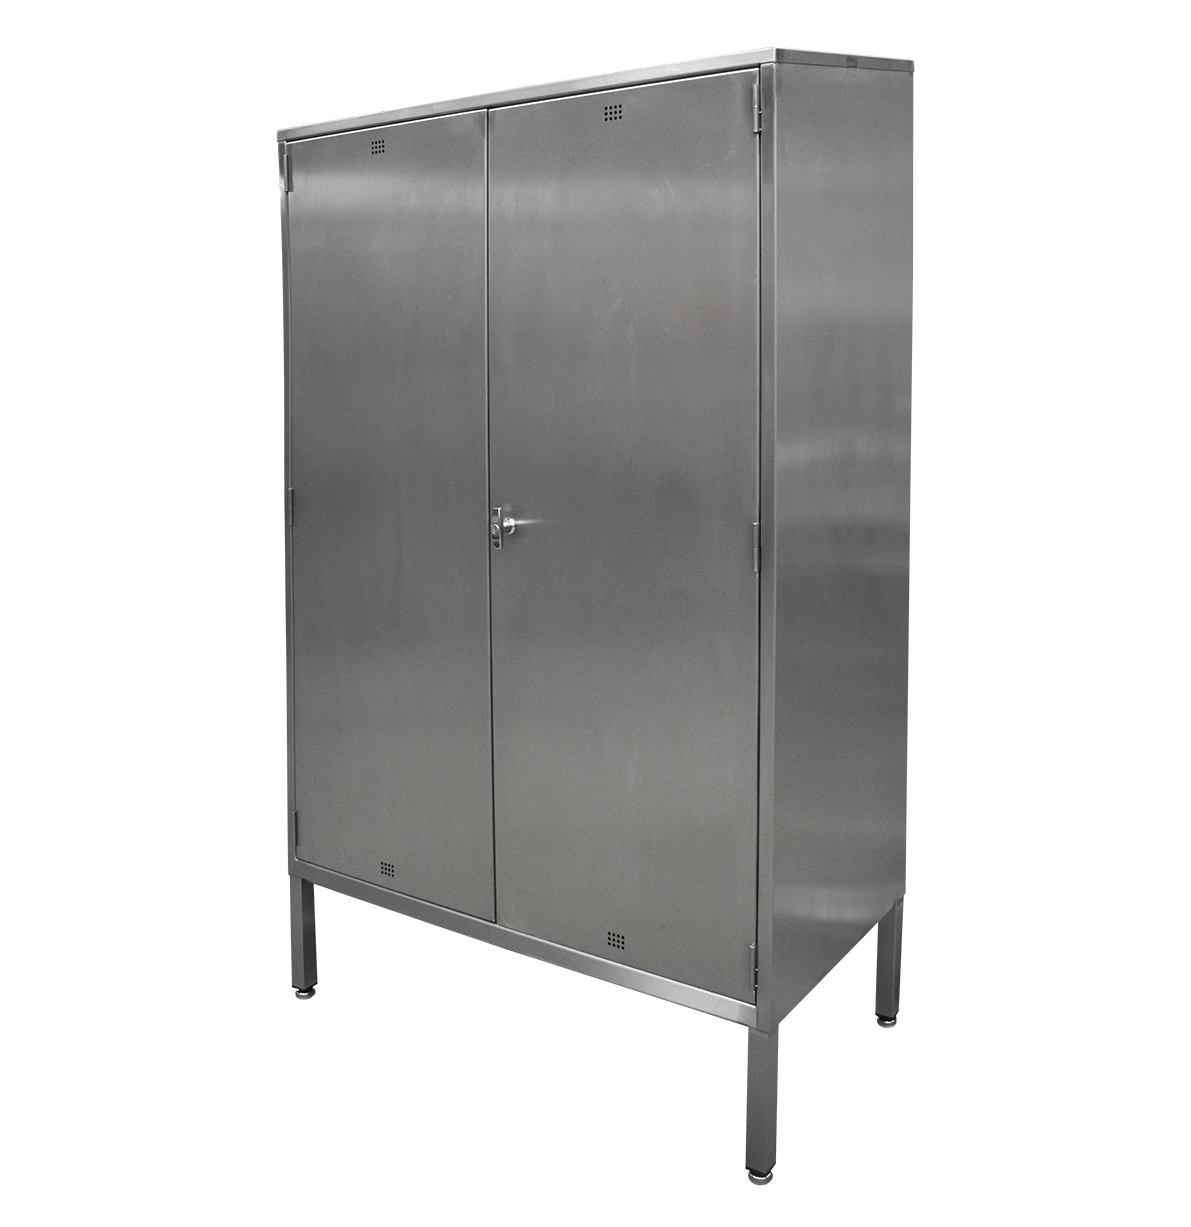 Stainless steel vented cupboard